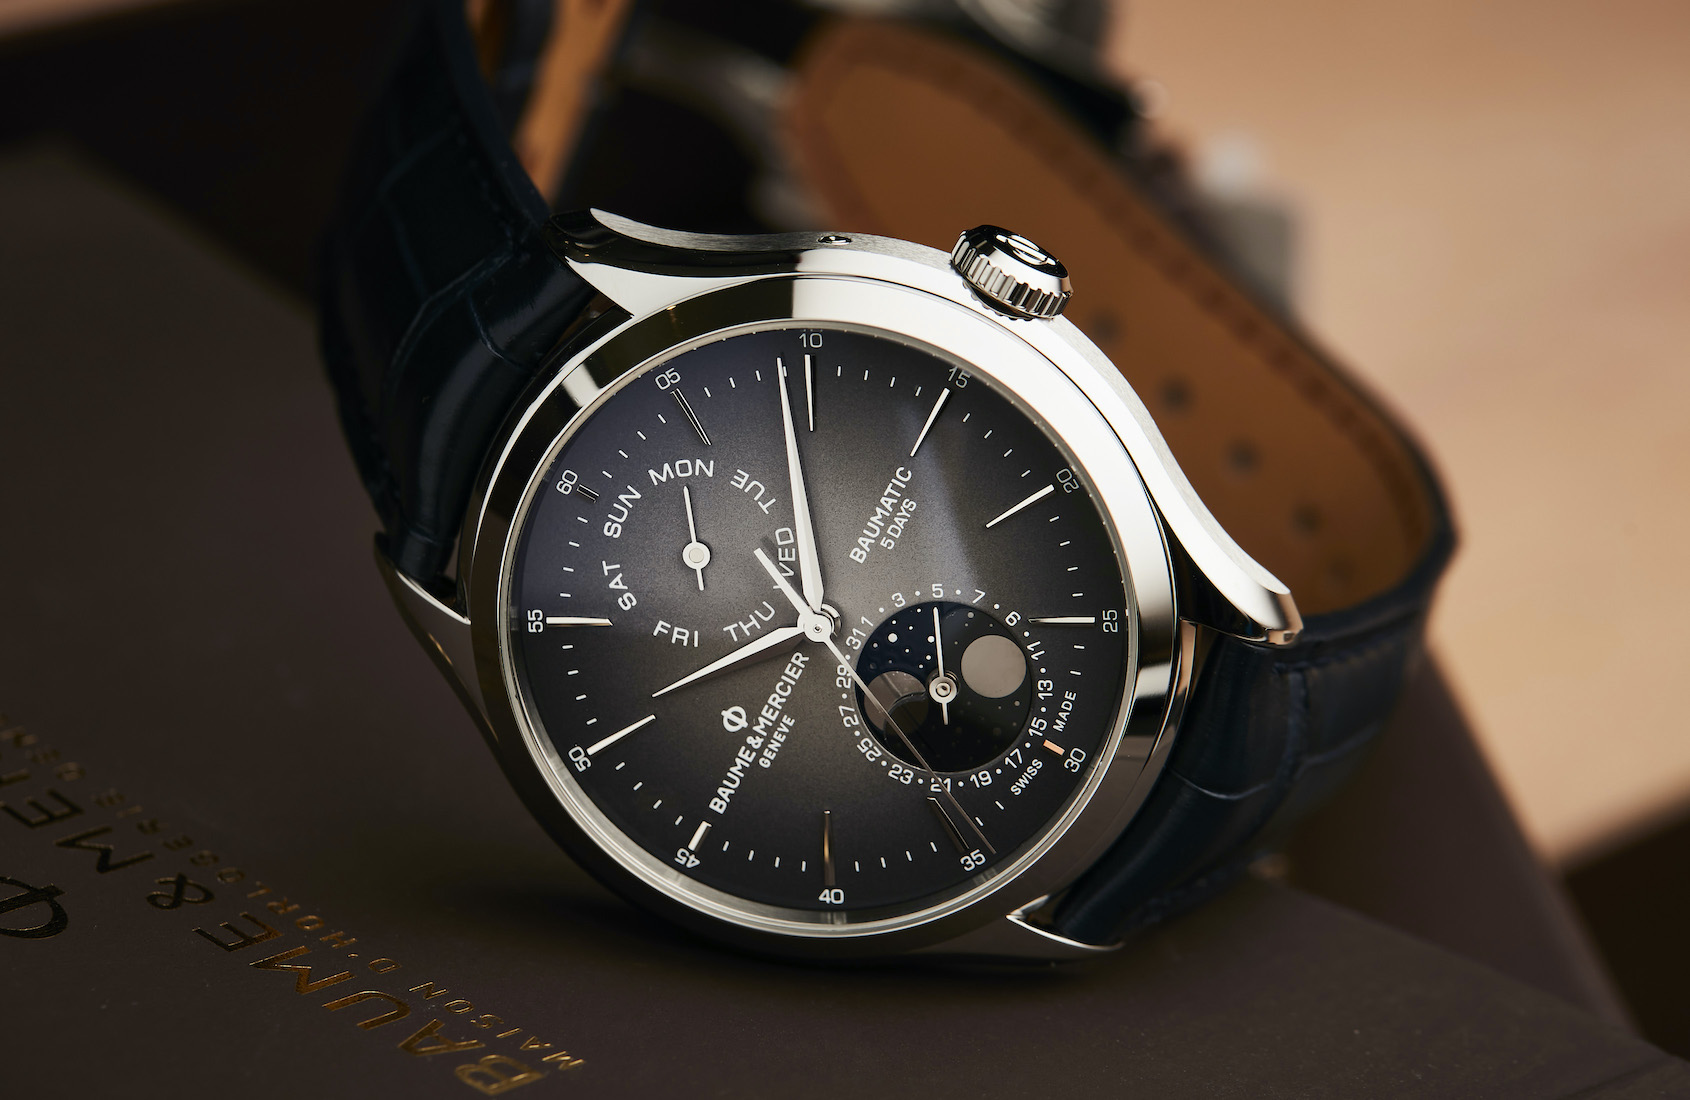 Baume & Mercier Clifton Baumatic Automatic Day Date Moon Phase